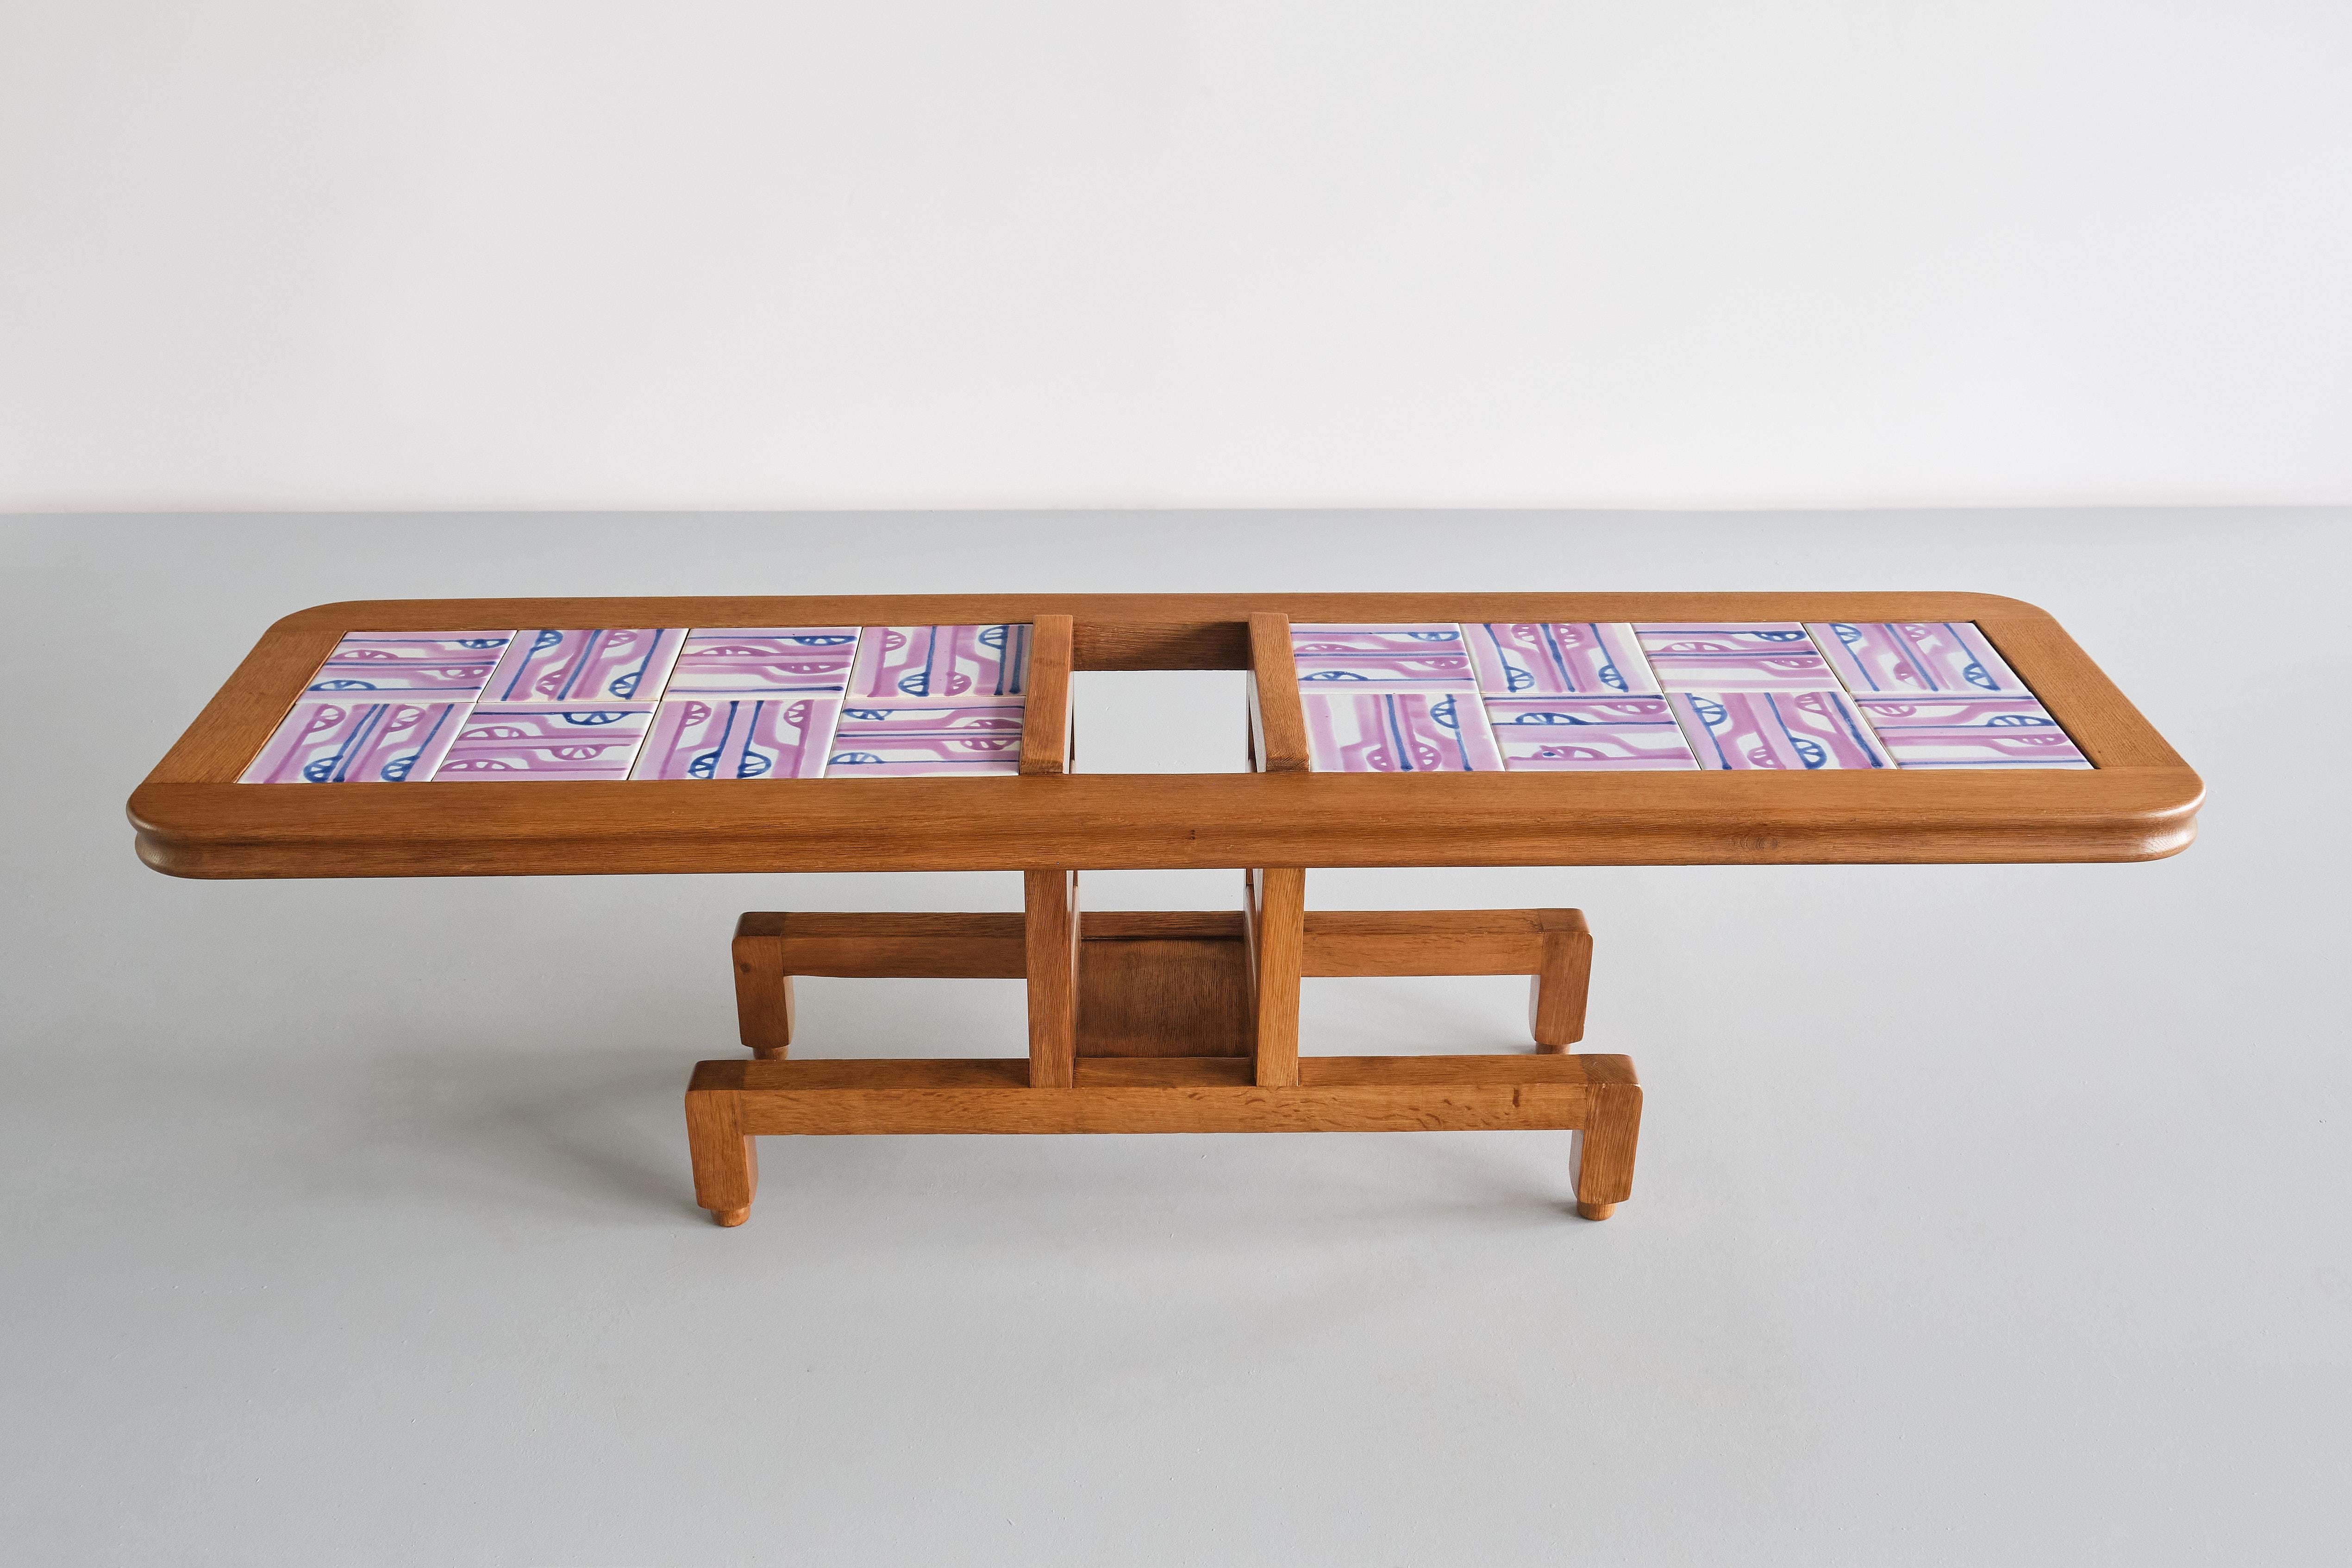 This striking rectangular coffee table was designed by Jacques Chambron and Robert Guillerme in the 1960s. It was produced by their company Votre Maison in Northern France. This particular model was named 'Clément' and is one of the more rare coffee